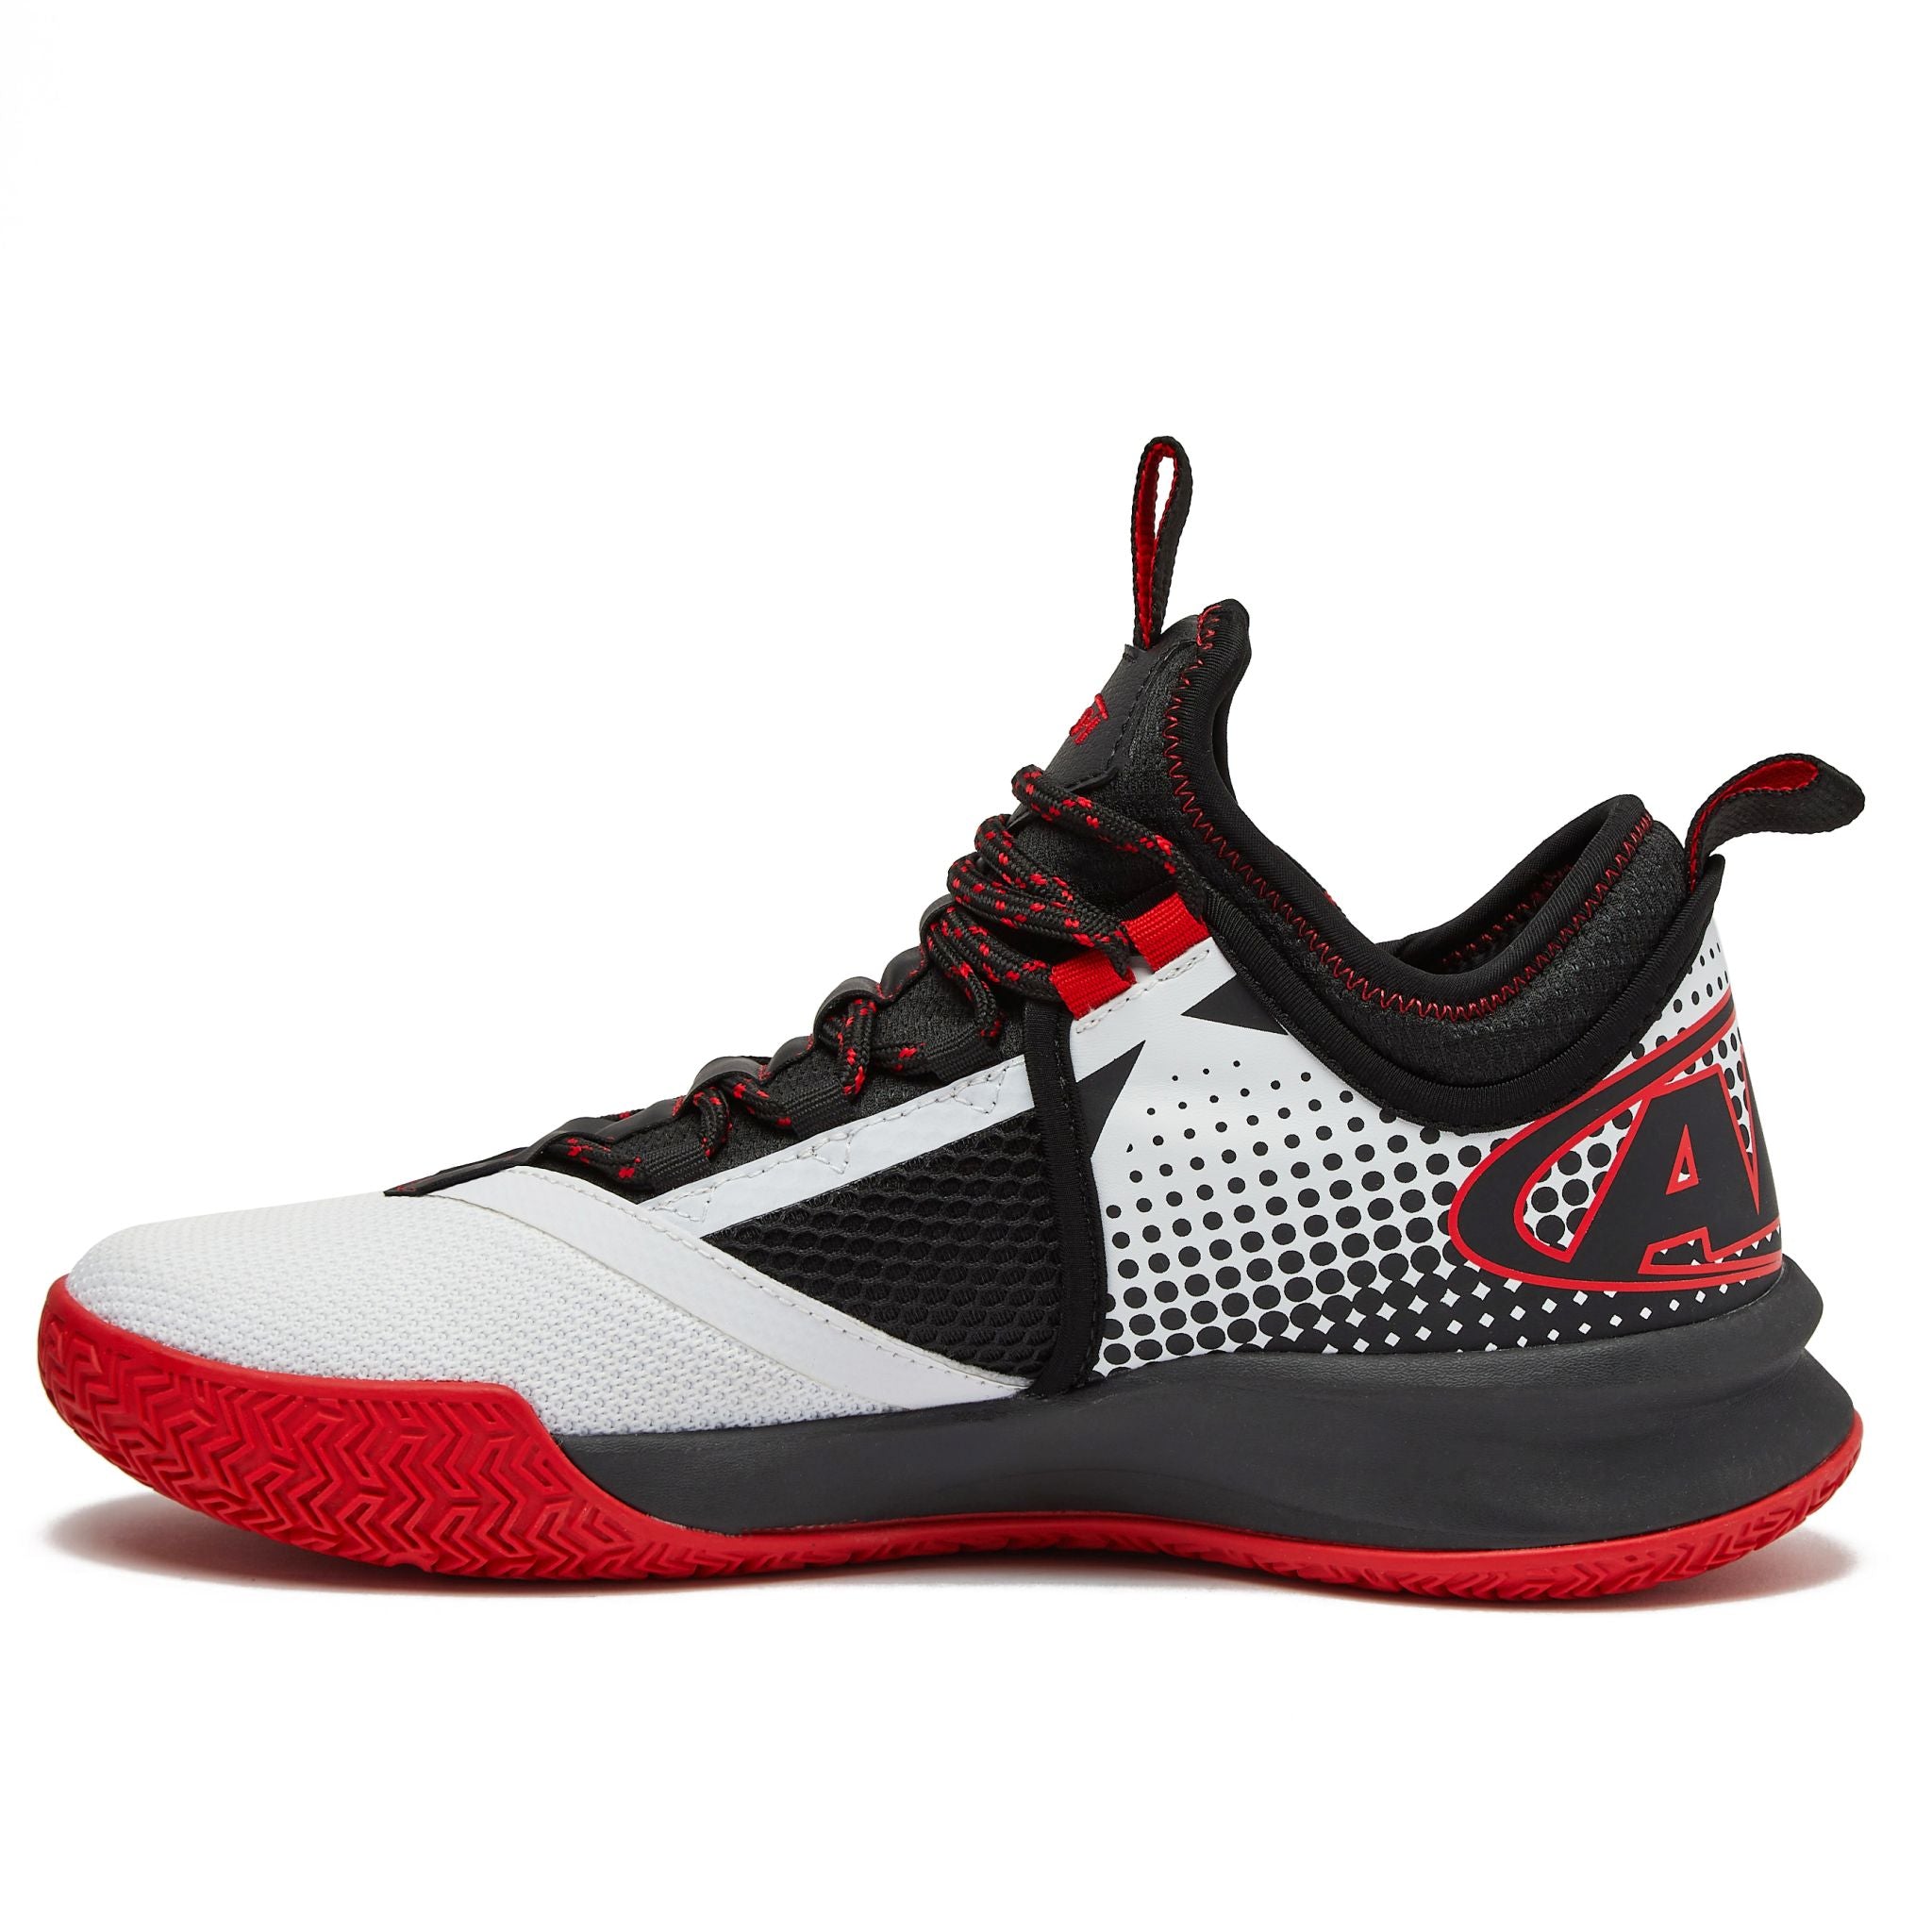 AND1 Charge Adults Basketball Shoe